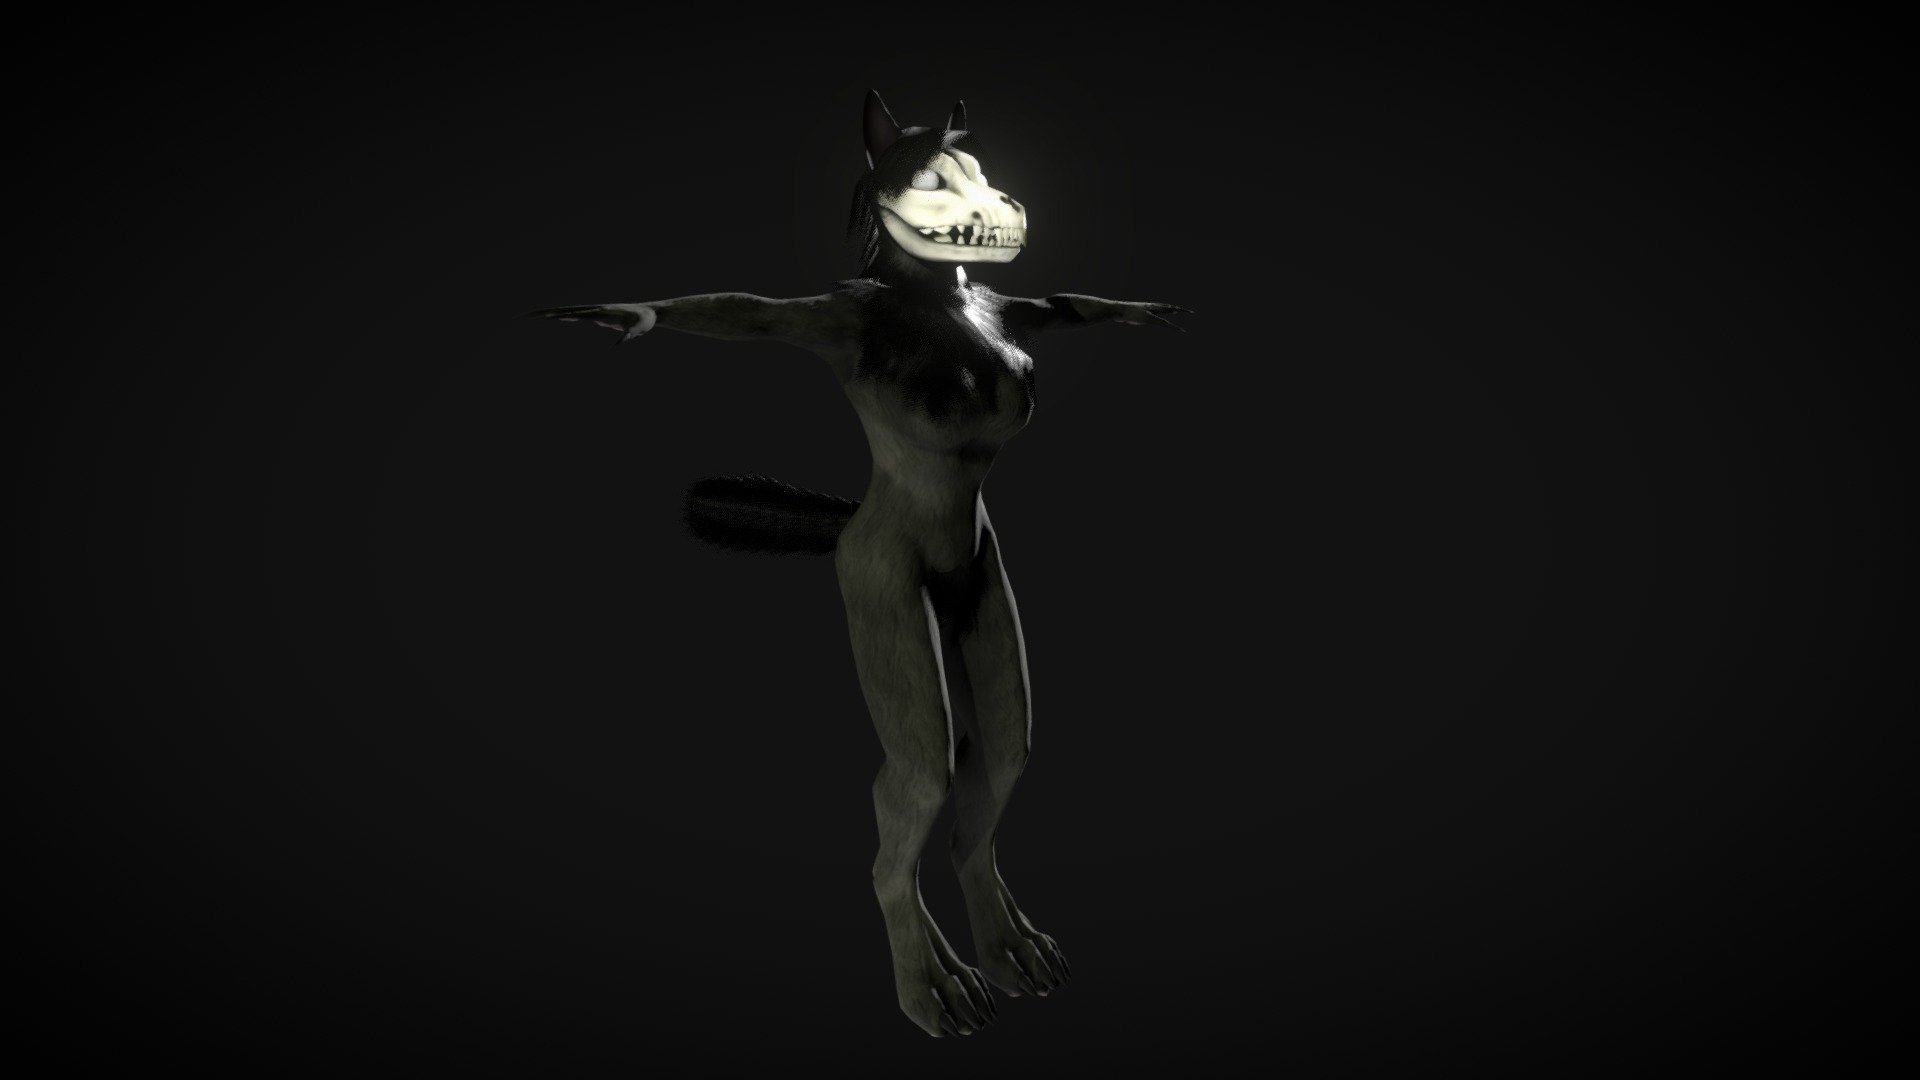 Oficina Steam::Mal0 (SCP 1471-A) Playermodel (Under 60mb resized)